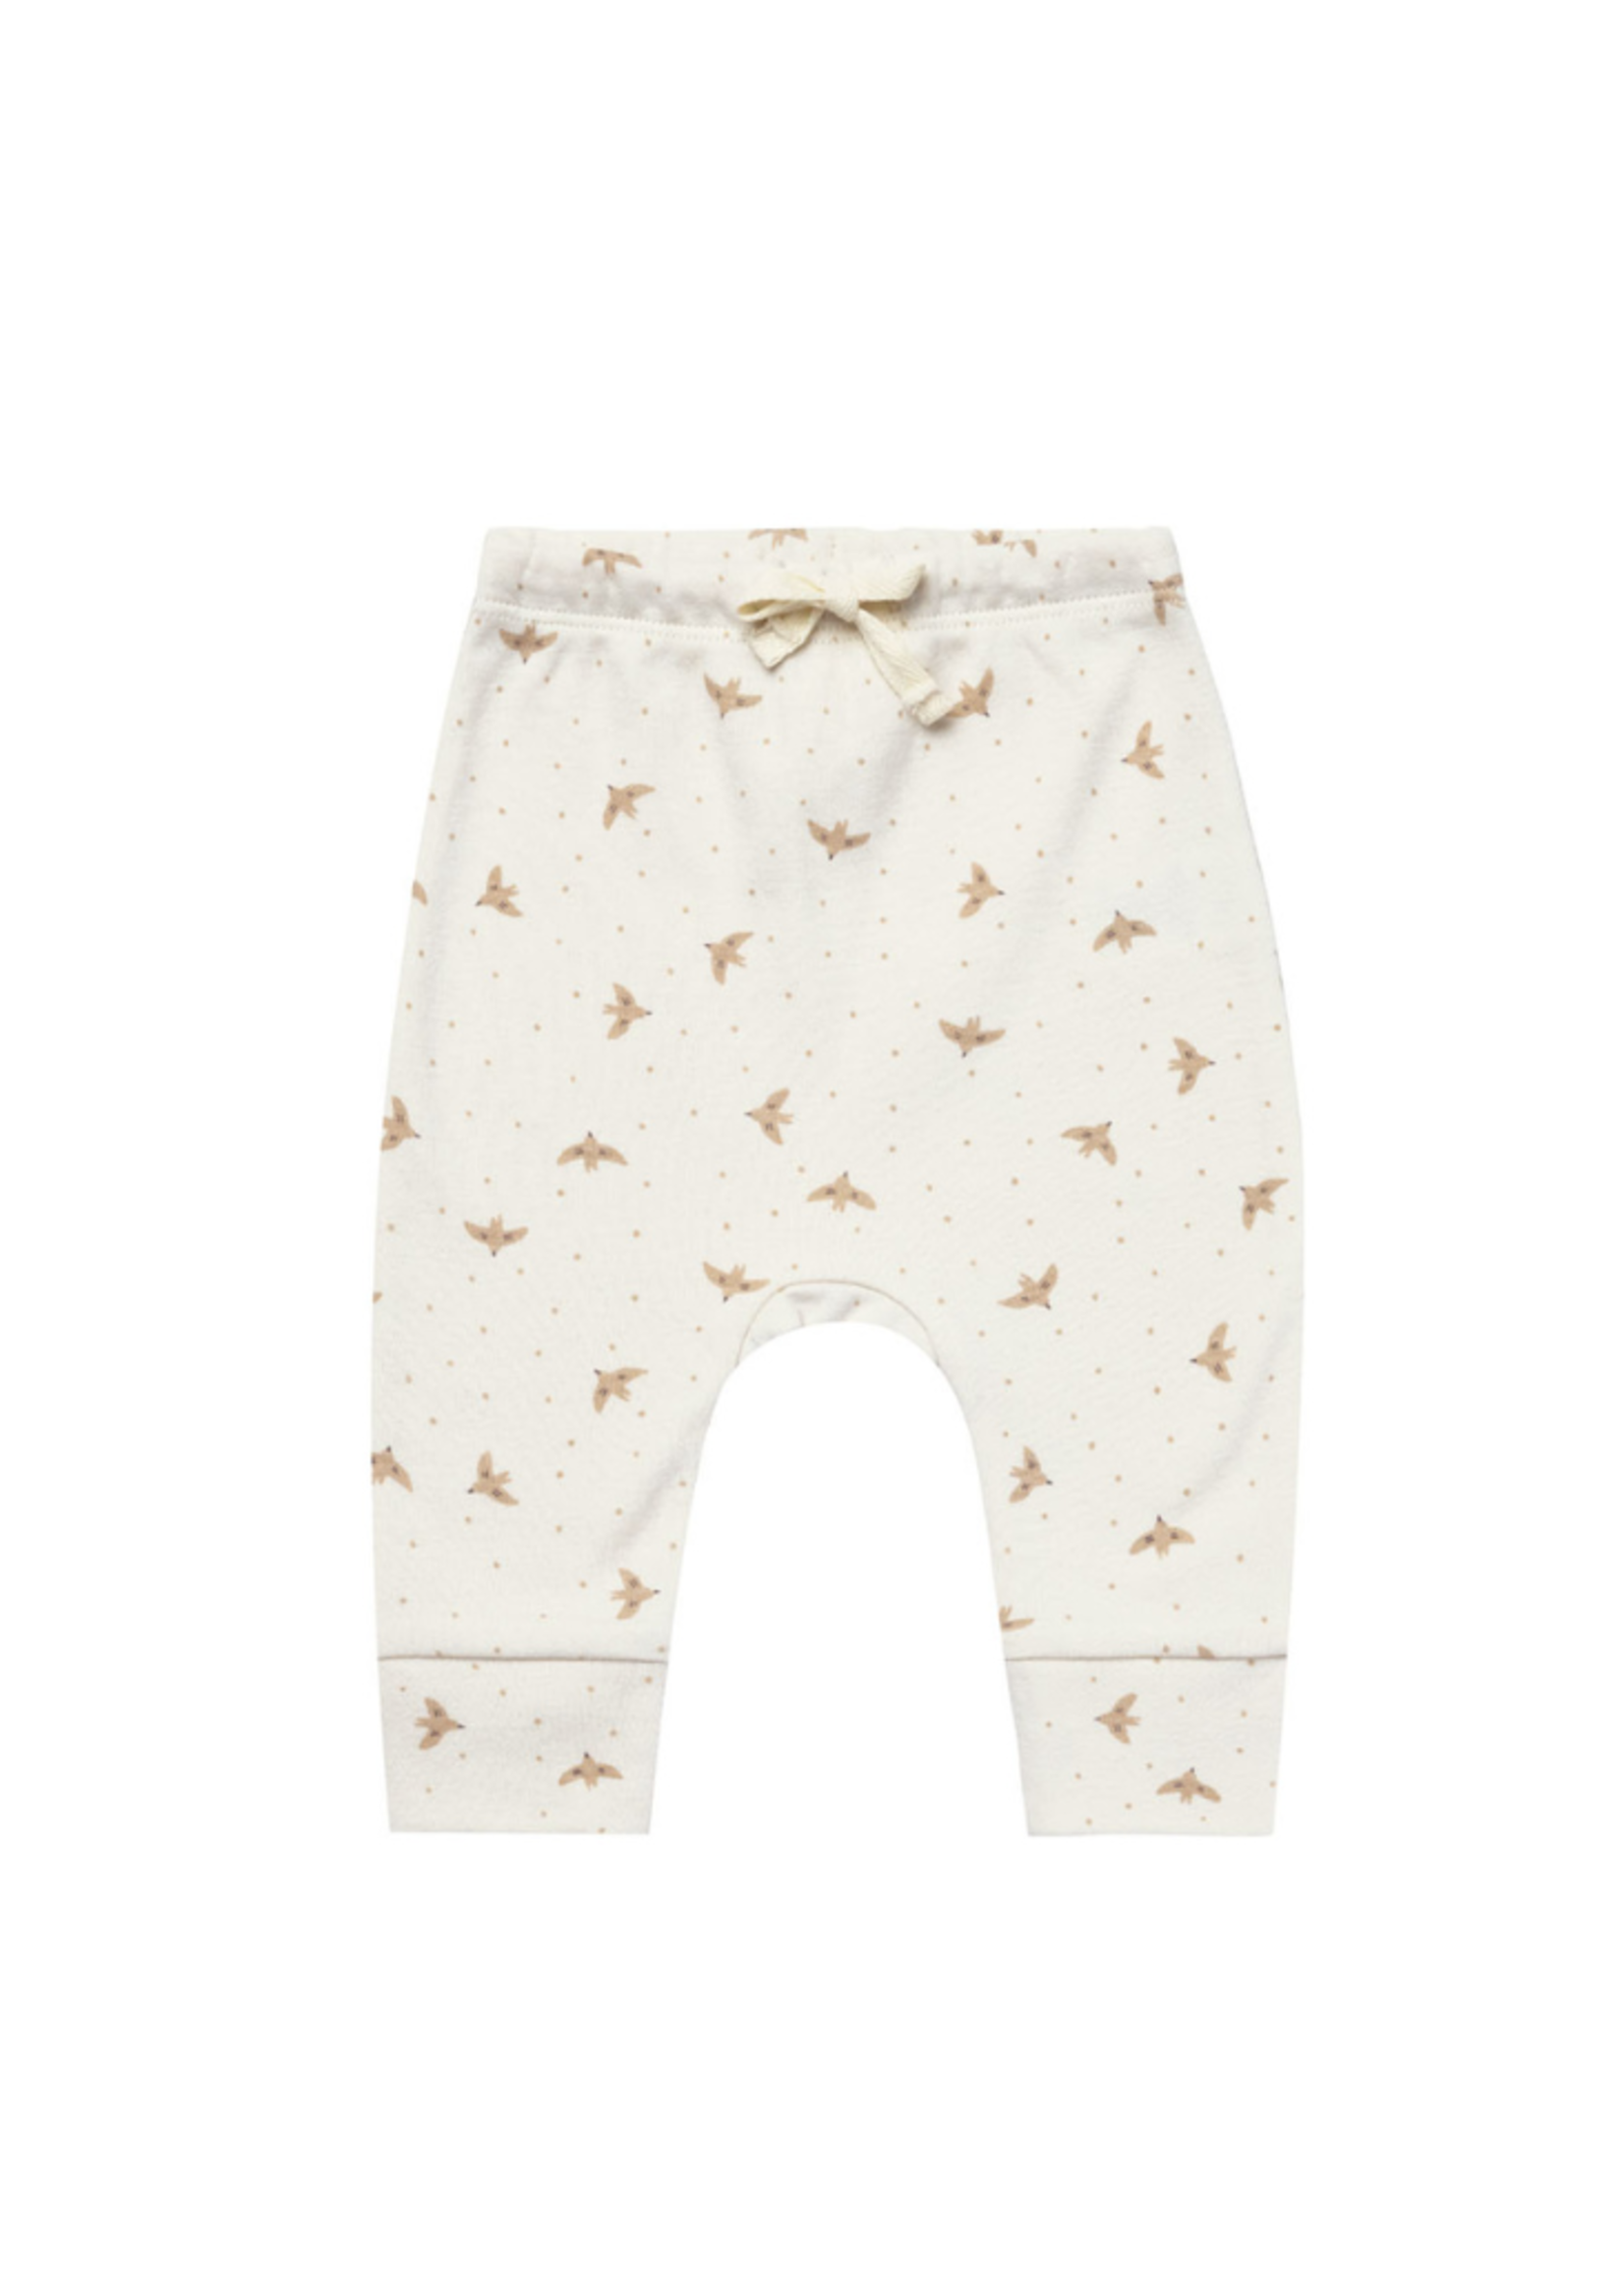 Quincy Mae Drawstring Pant - Doves